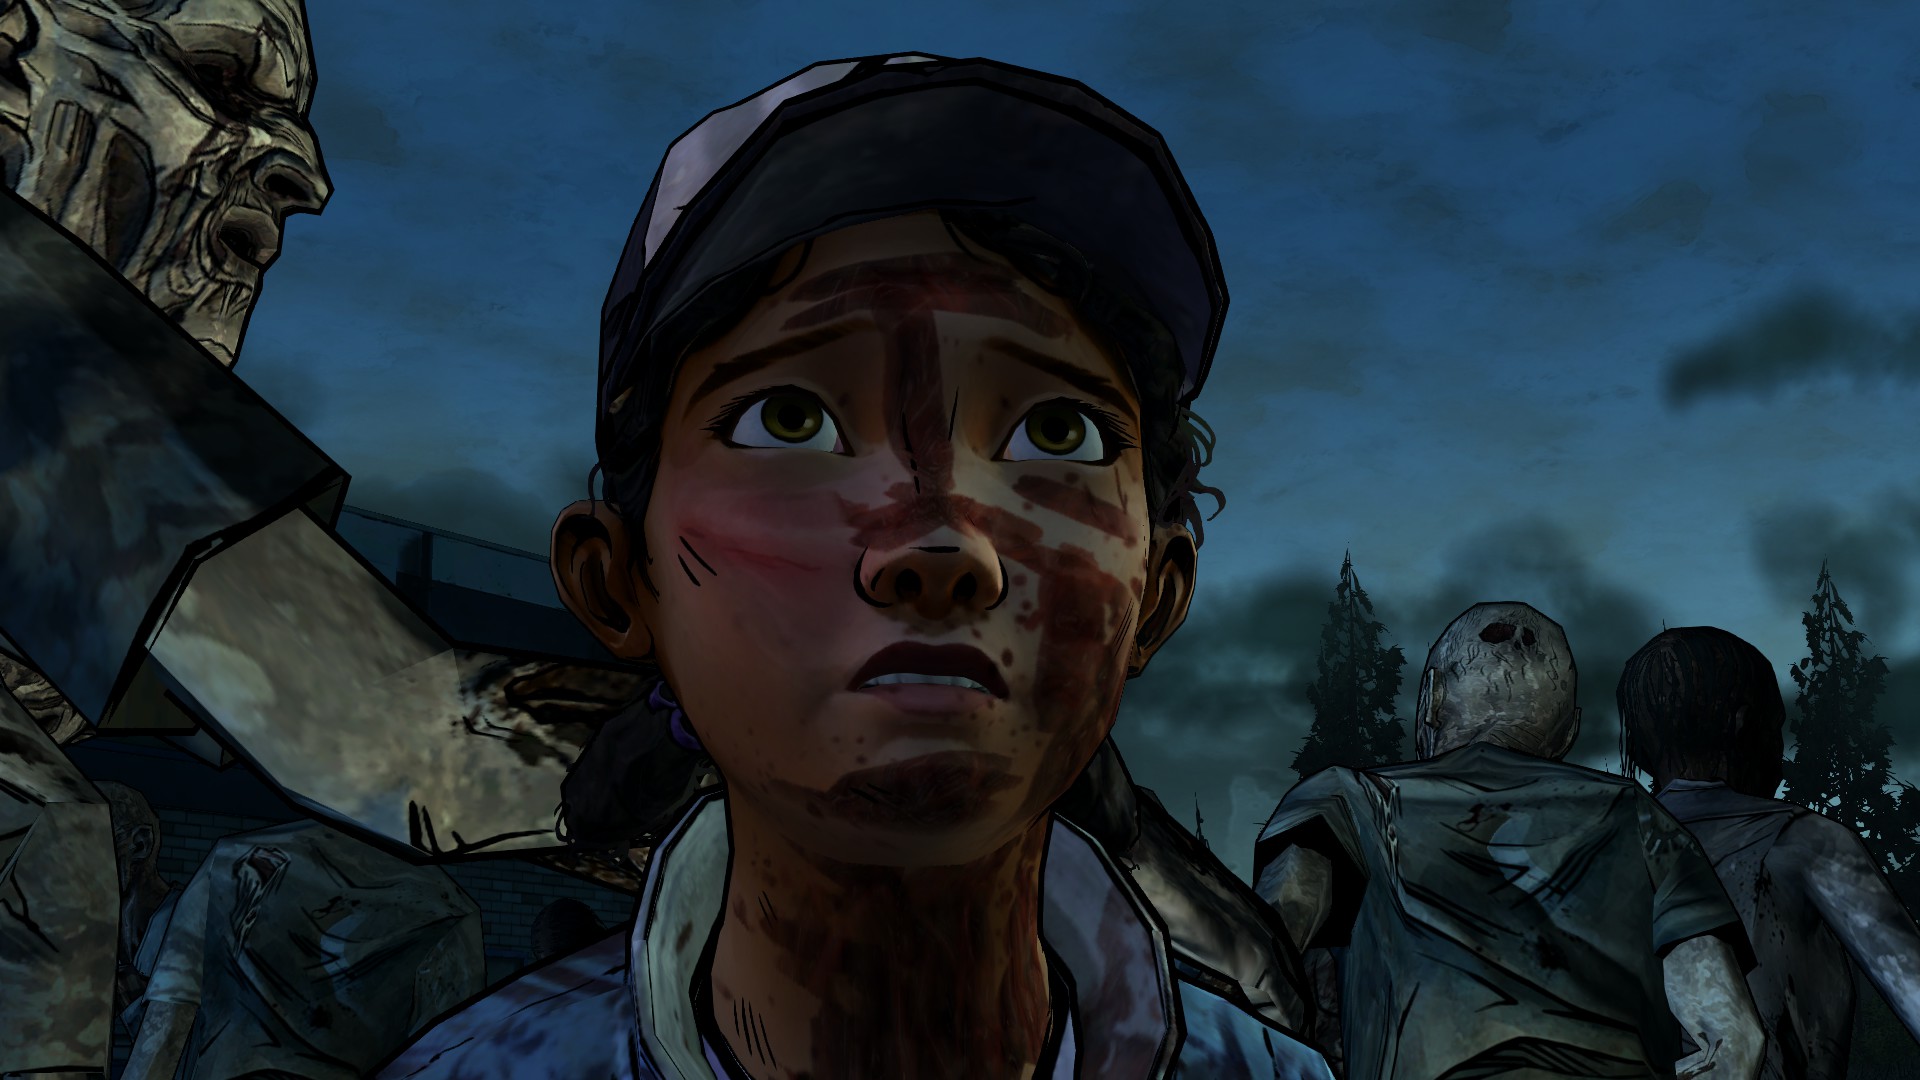 Geek insider, geekinsider, geekinsider. Com,, the walking dead game s2 e4 "amid the ruins" review, gaming